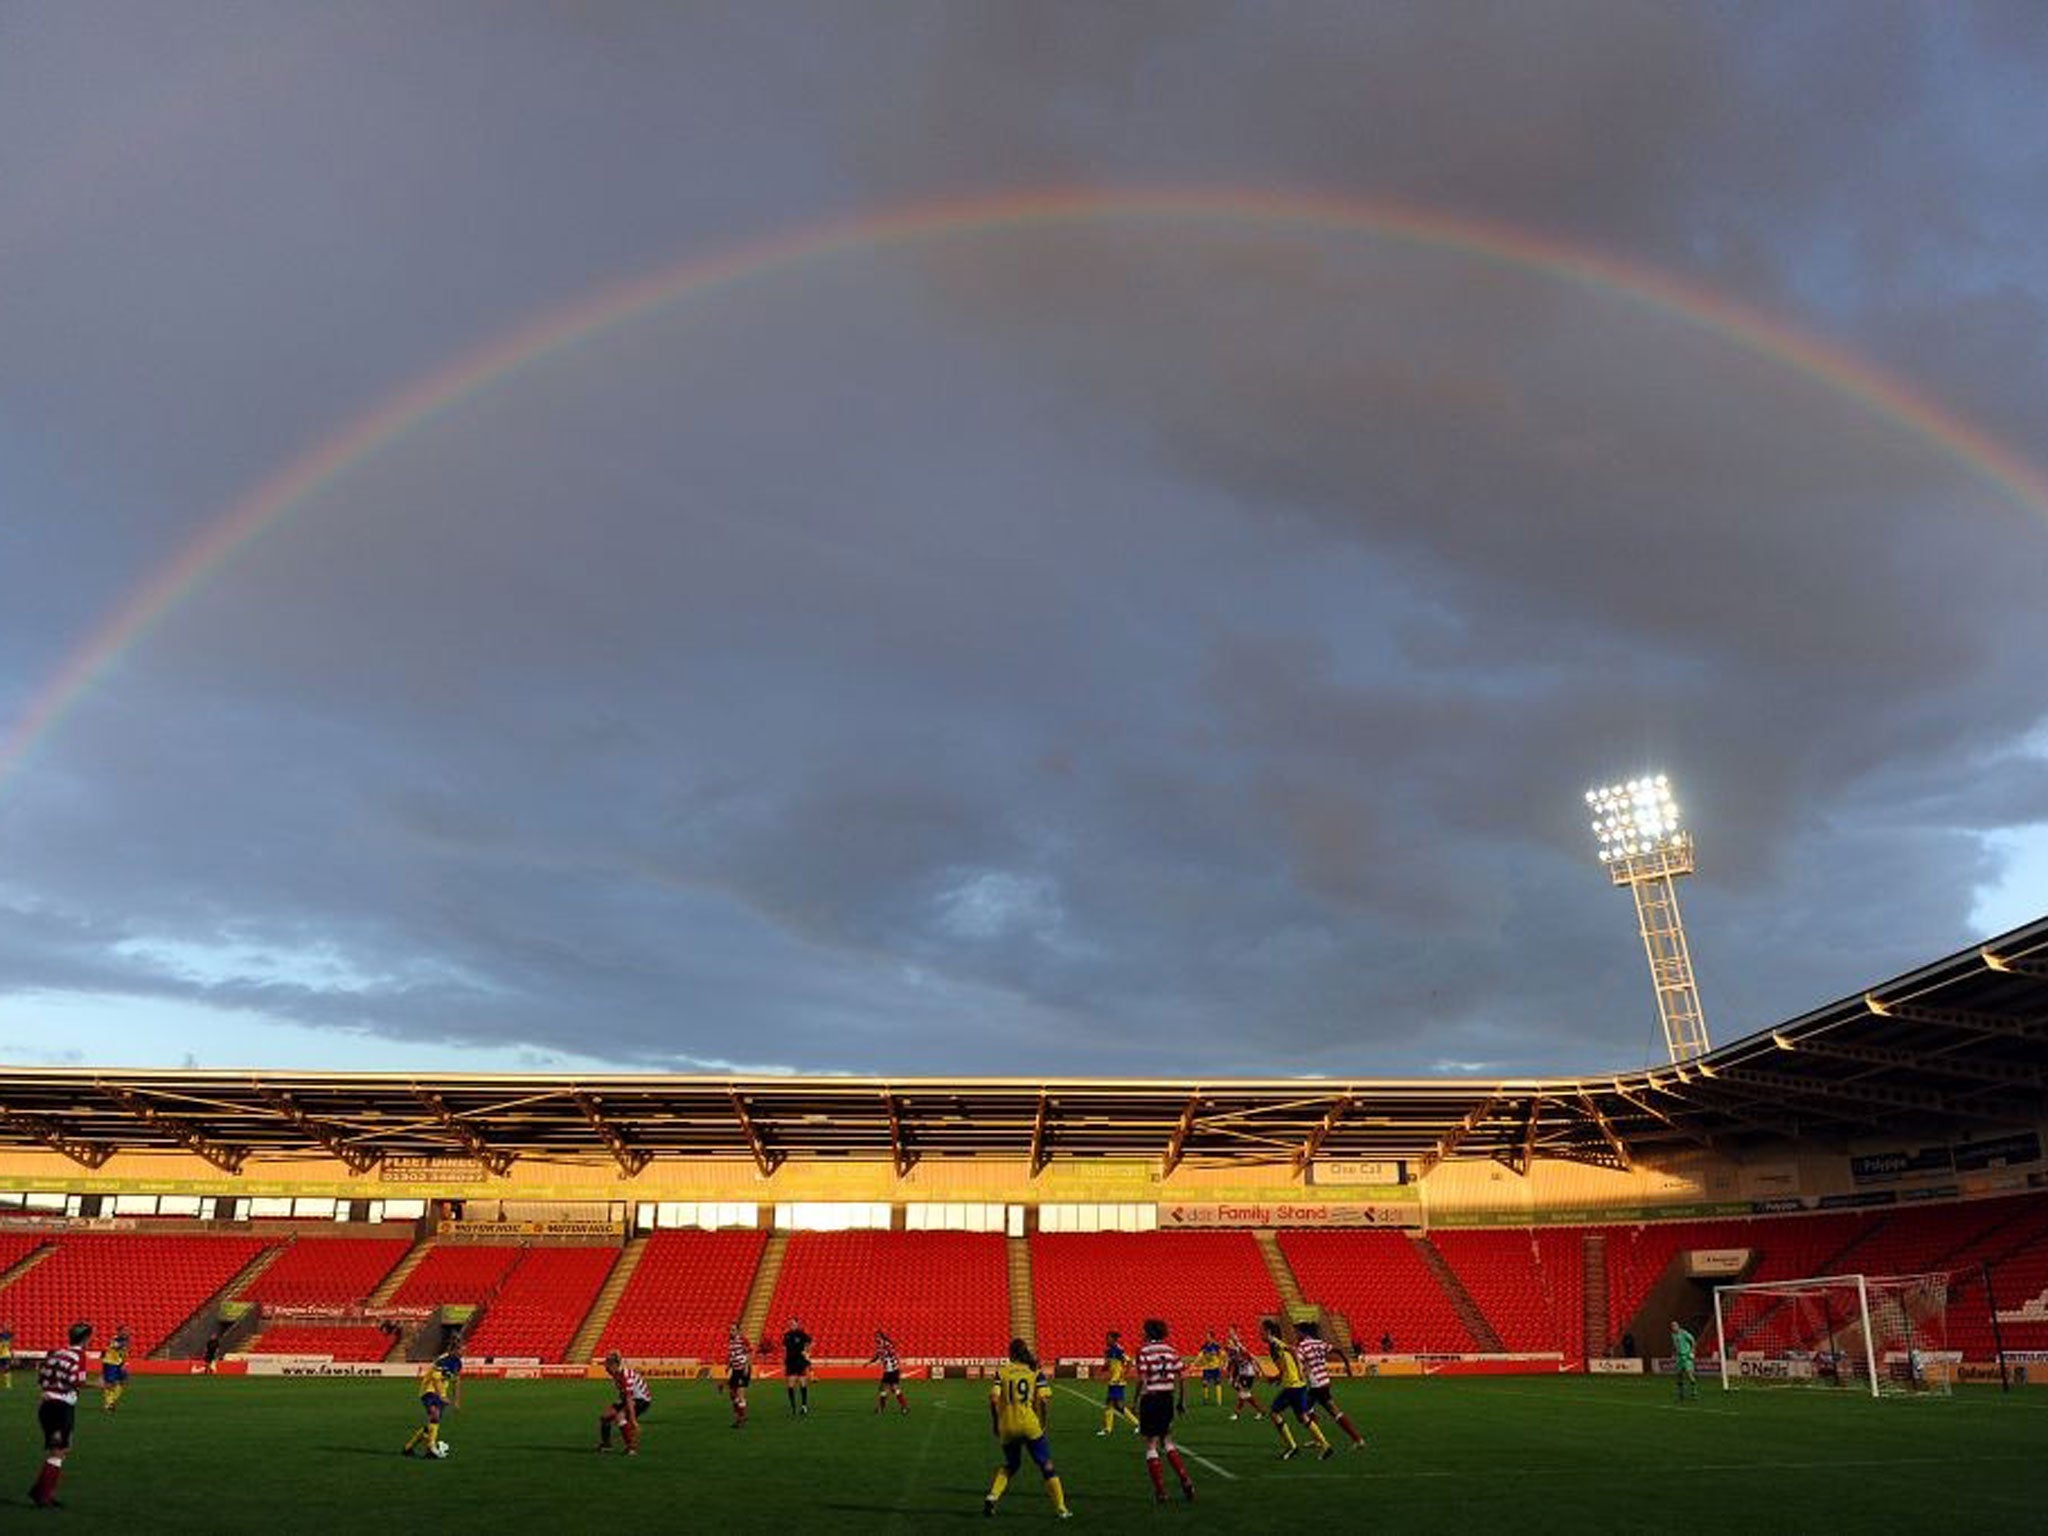 Ring the changes: The end of 22 years in the top flight of women’s football signals a new dawn for Doncaster Rovers Belles, who will be using Barcelona as a model for nurturing their players from youth to first team